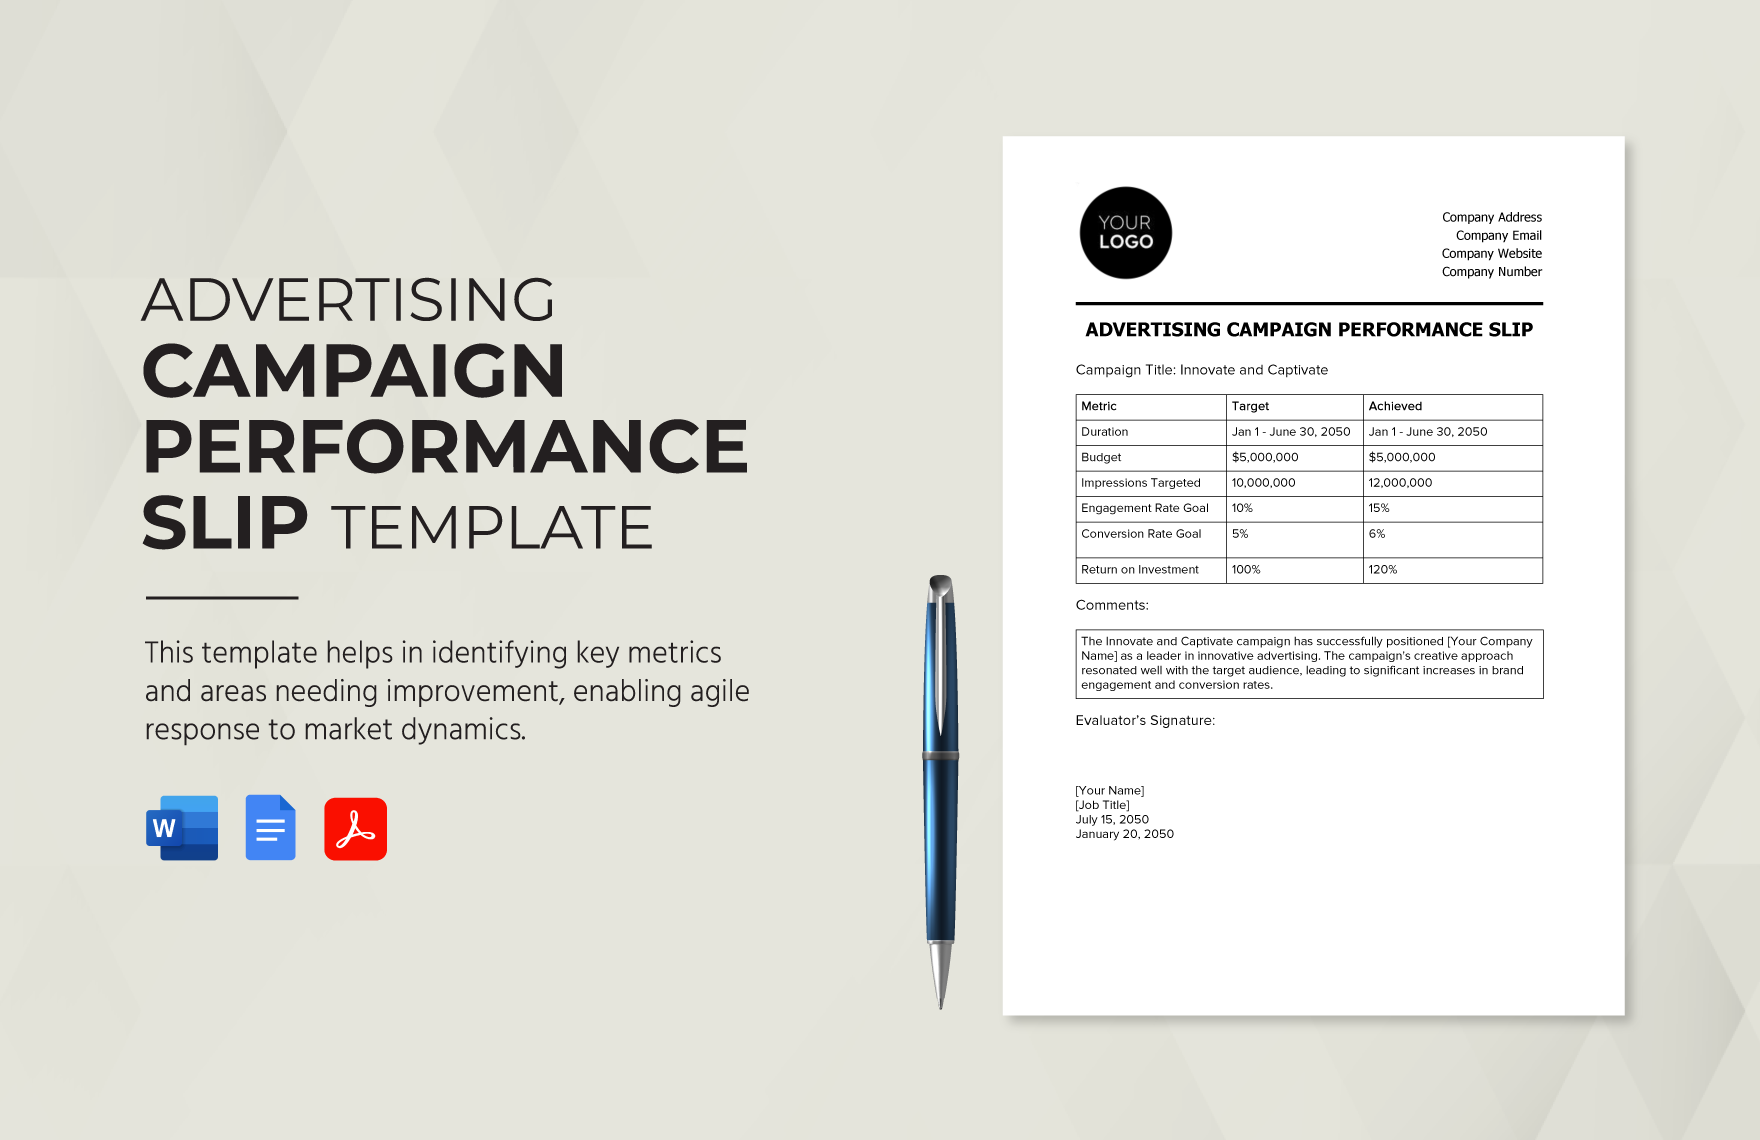 Advertising Campaign Performance Slip Template in Word, Google Docs, PDF